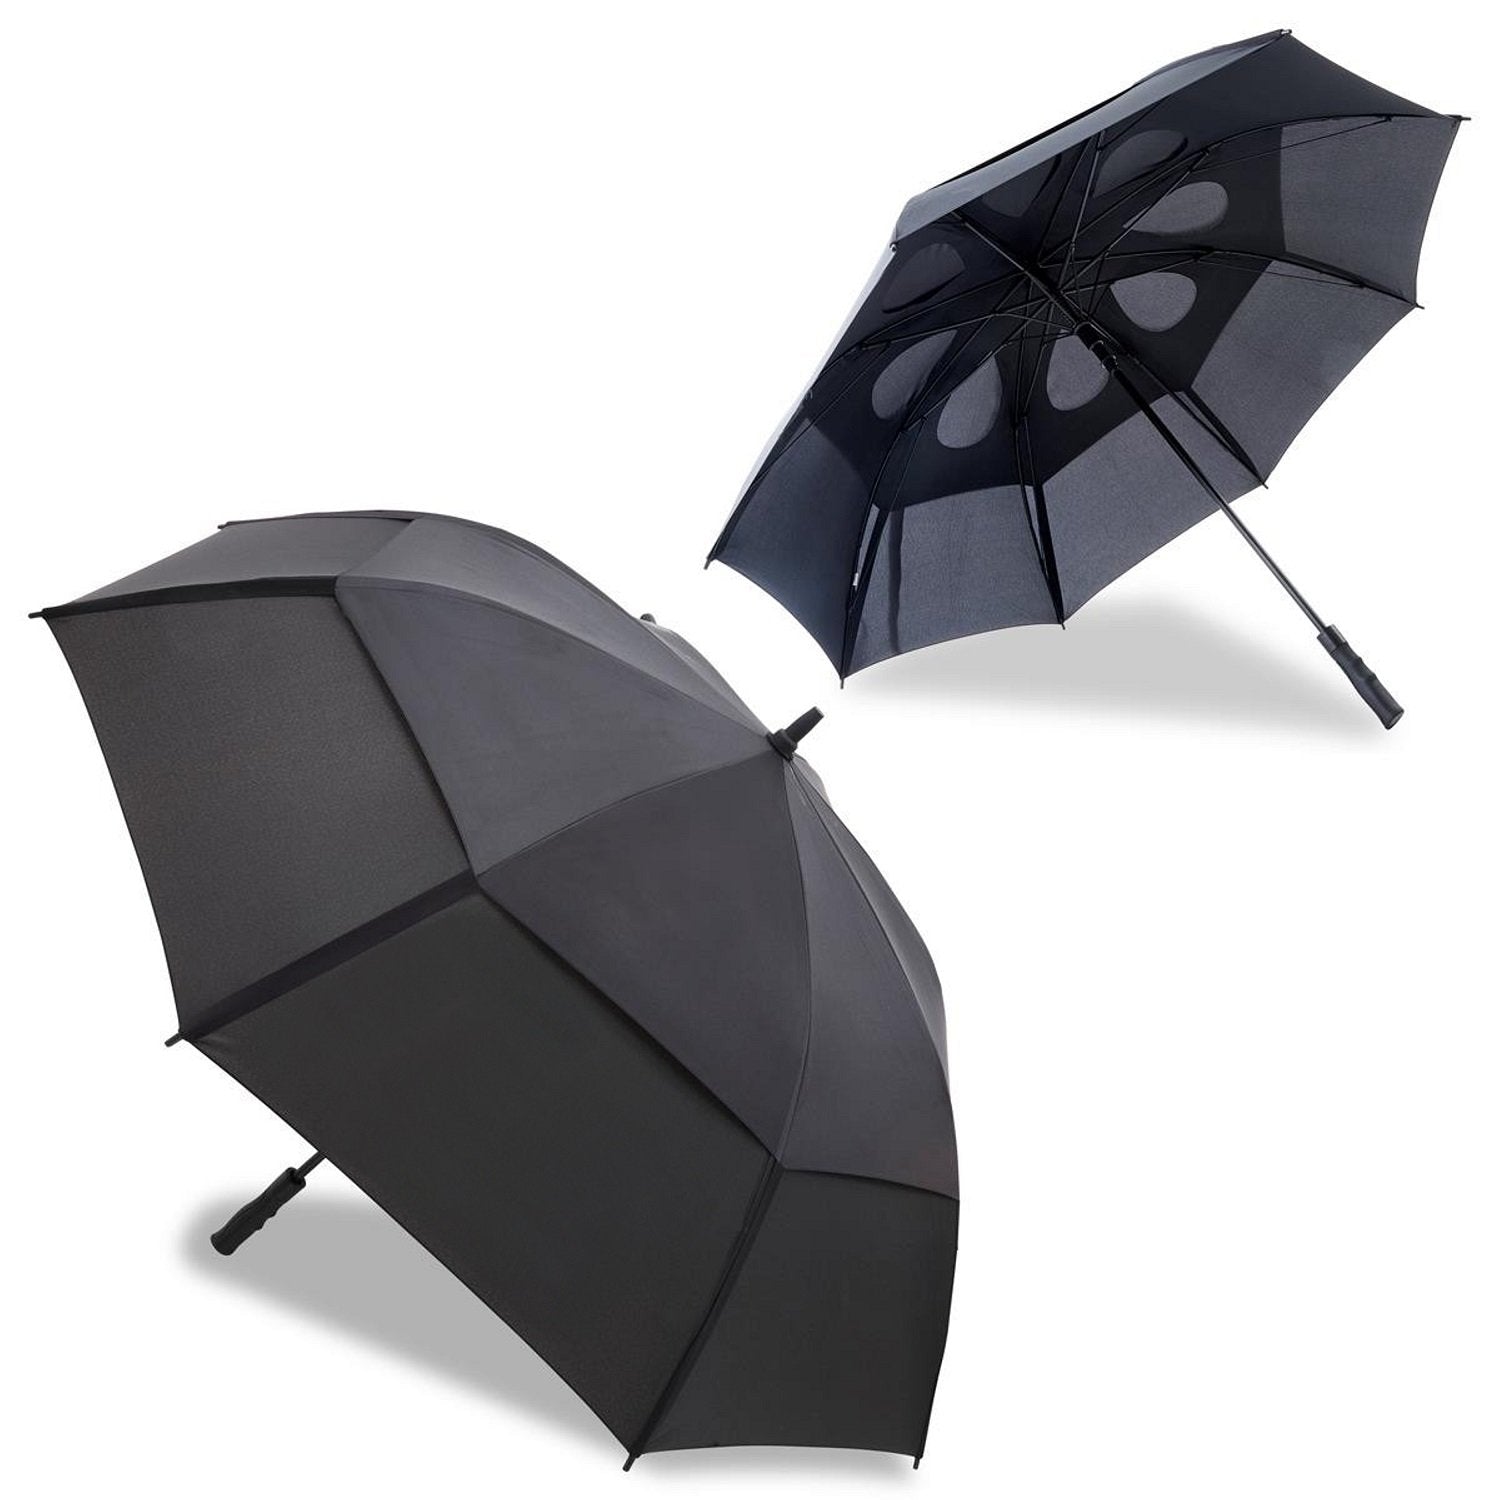 UMBRA®️ ULTIMATE Heavy Duty Umbrella With Superior ULTIMATE™ Fibreglass Frame, Double Layer Wind Vent System - Auto-Open Push Button Feature